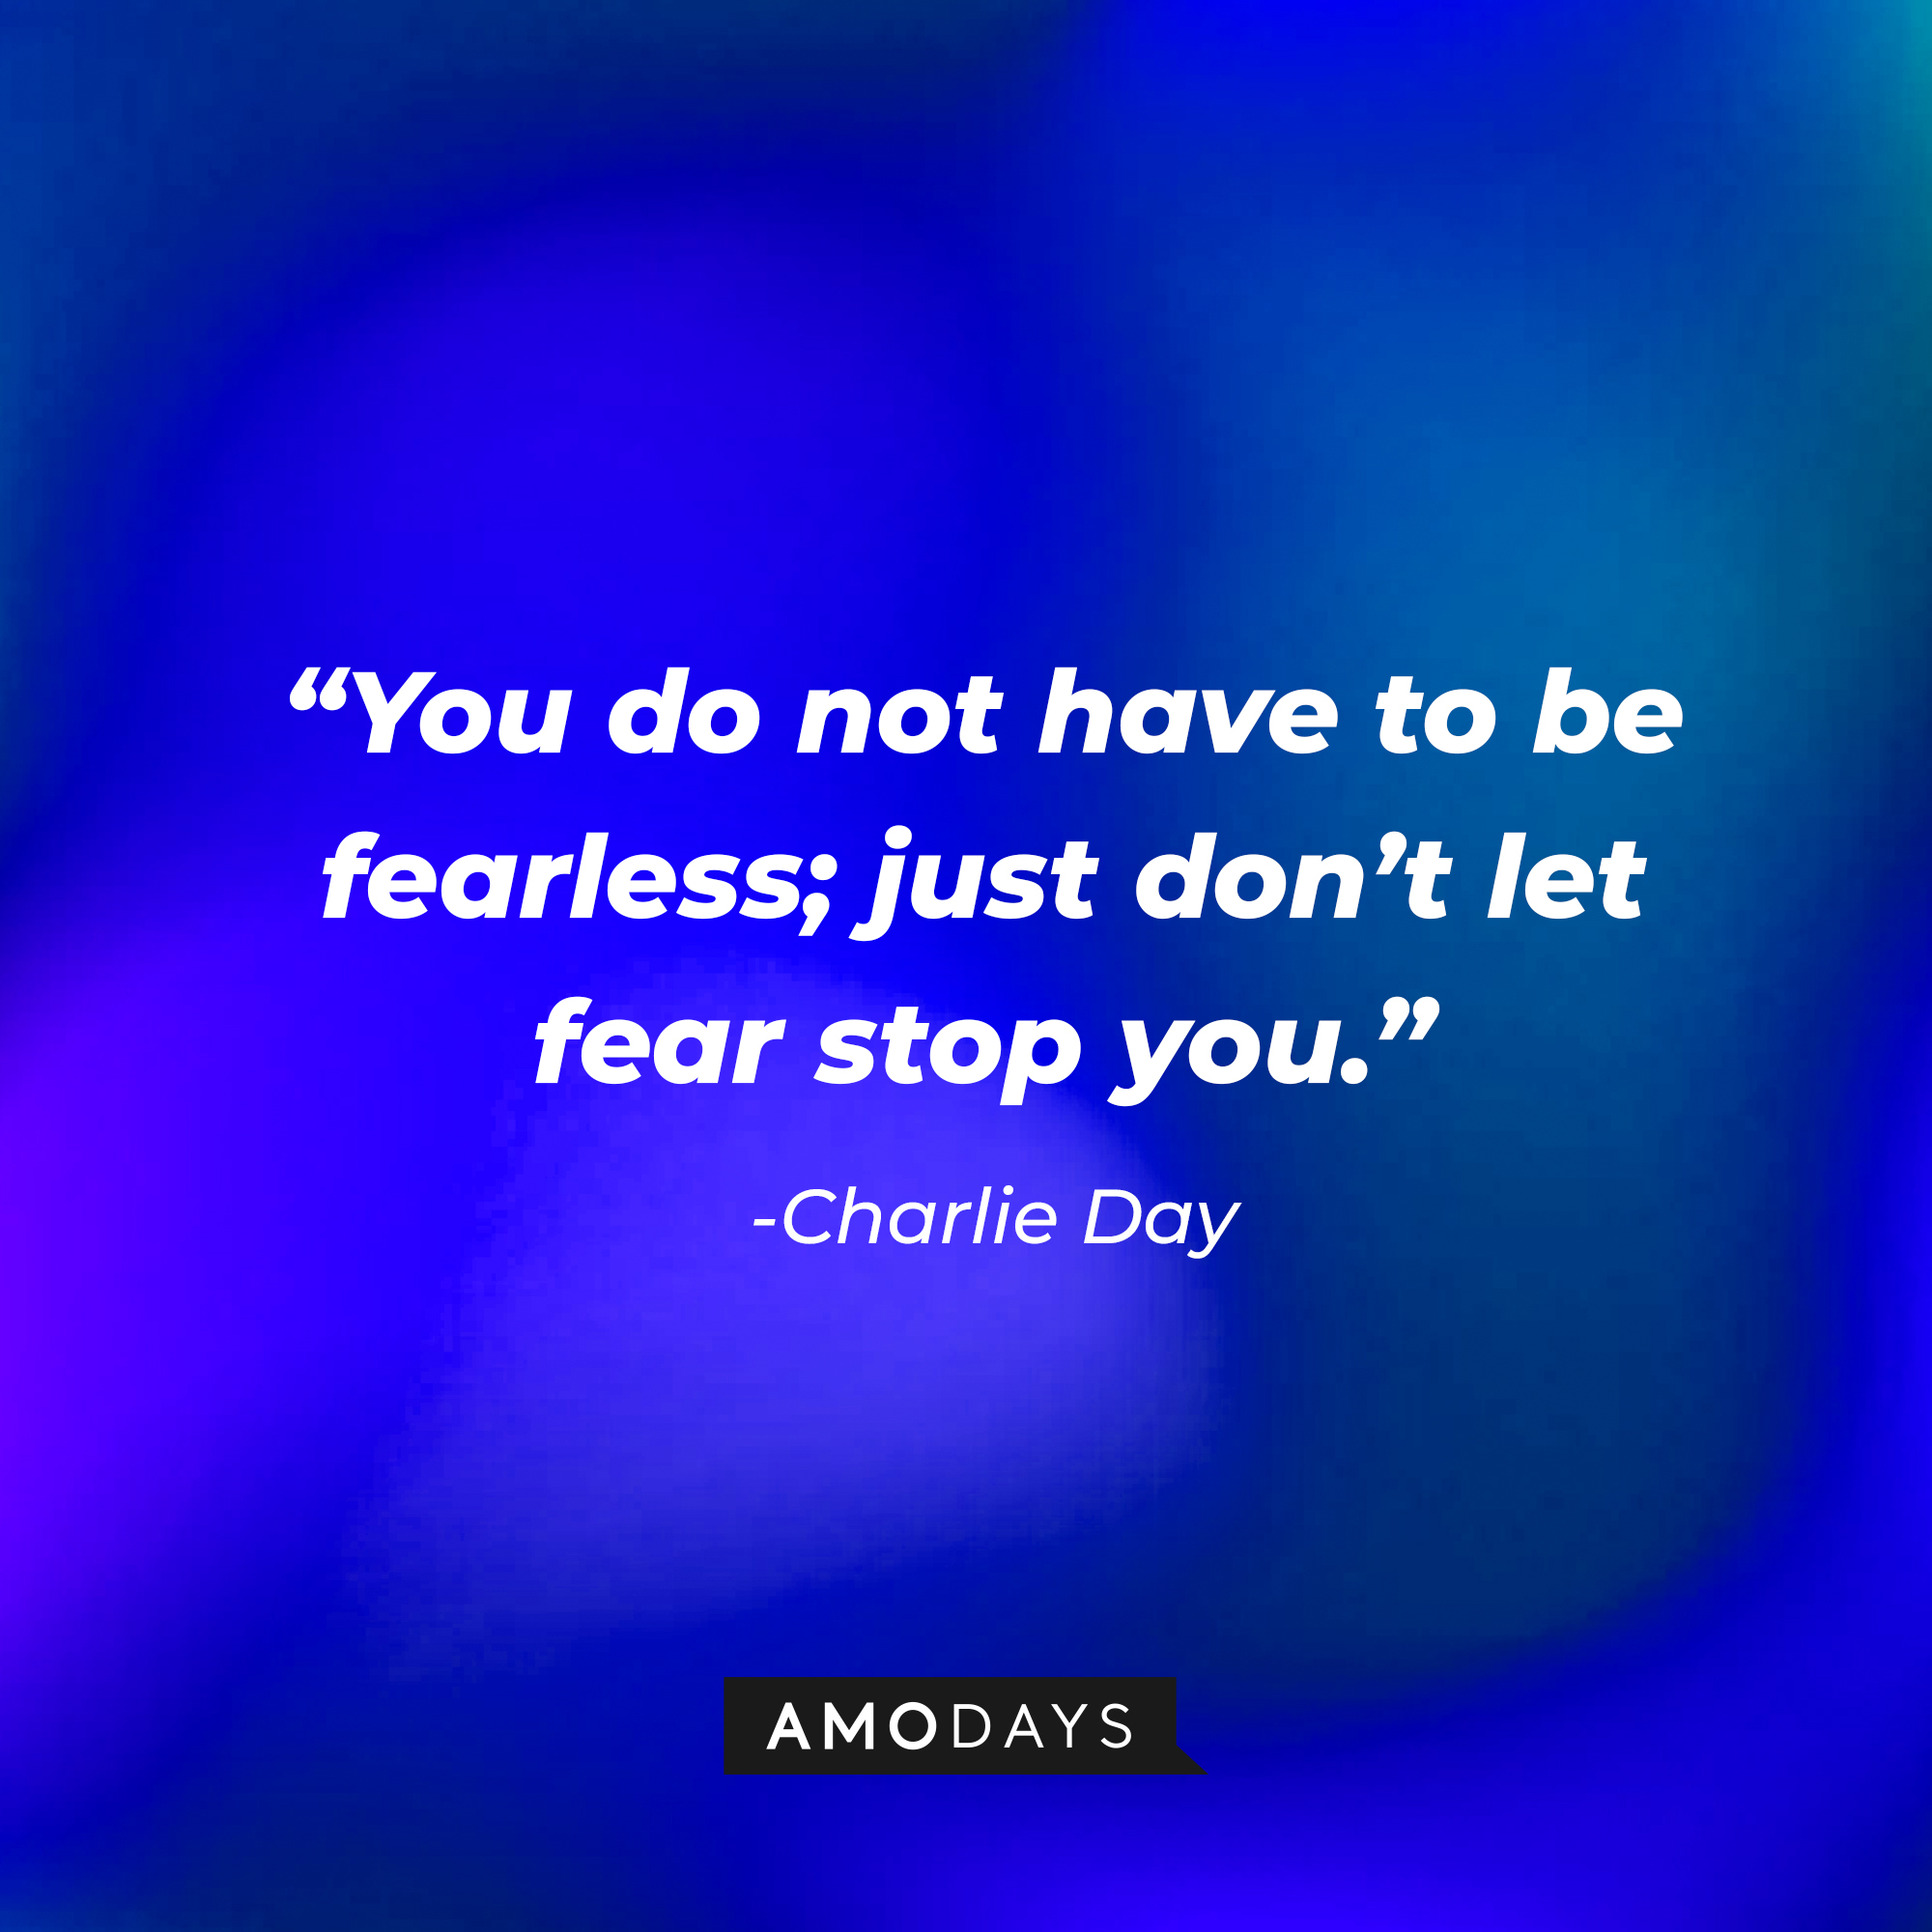 Charlie Day’s quote: “You do not have to be fearless; just don’t let fear stop you.” | Source: AmoDays